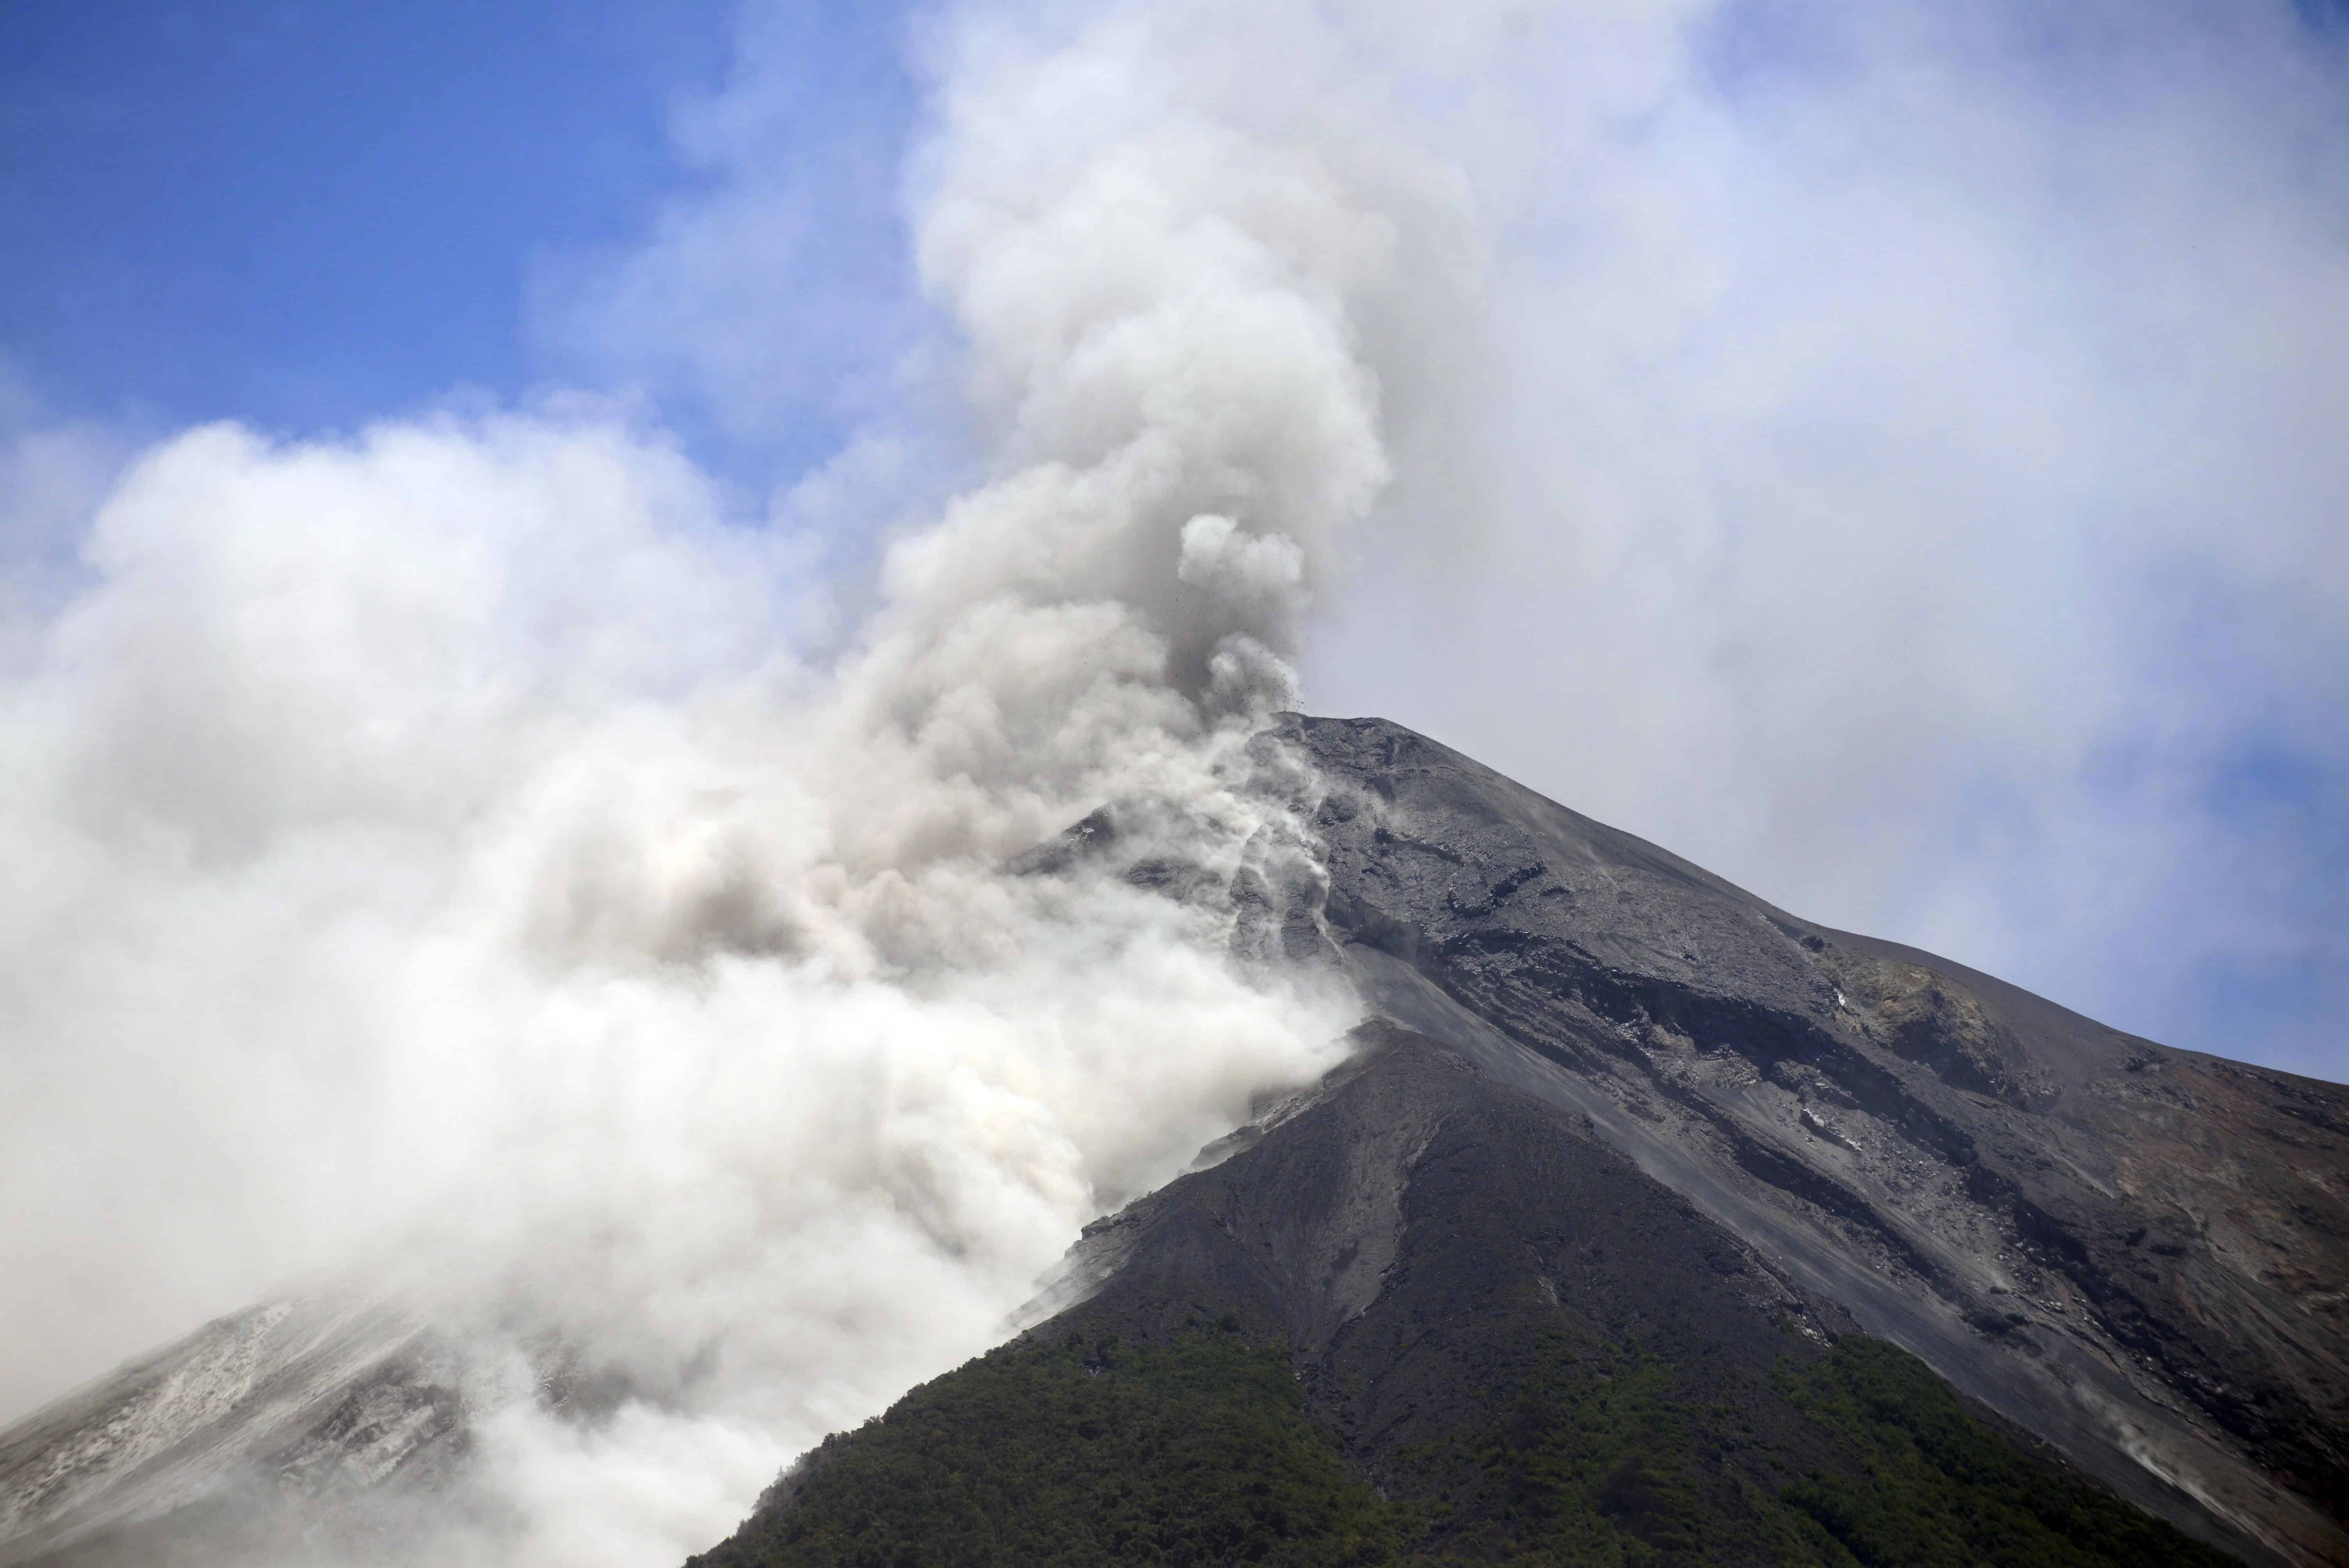 The Fuego Volcano, seen from Alotenango municipality, Sacatepequez departament, about 65 km southwest of Guatemala City, erupts on July 1, 2015. The volcano spewed lava and columns of ash into the air and authorities have raised the alert level in the area to orange.